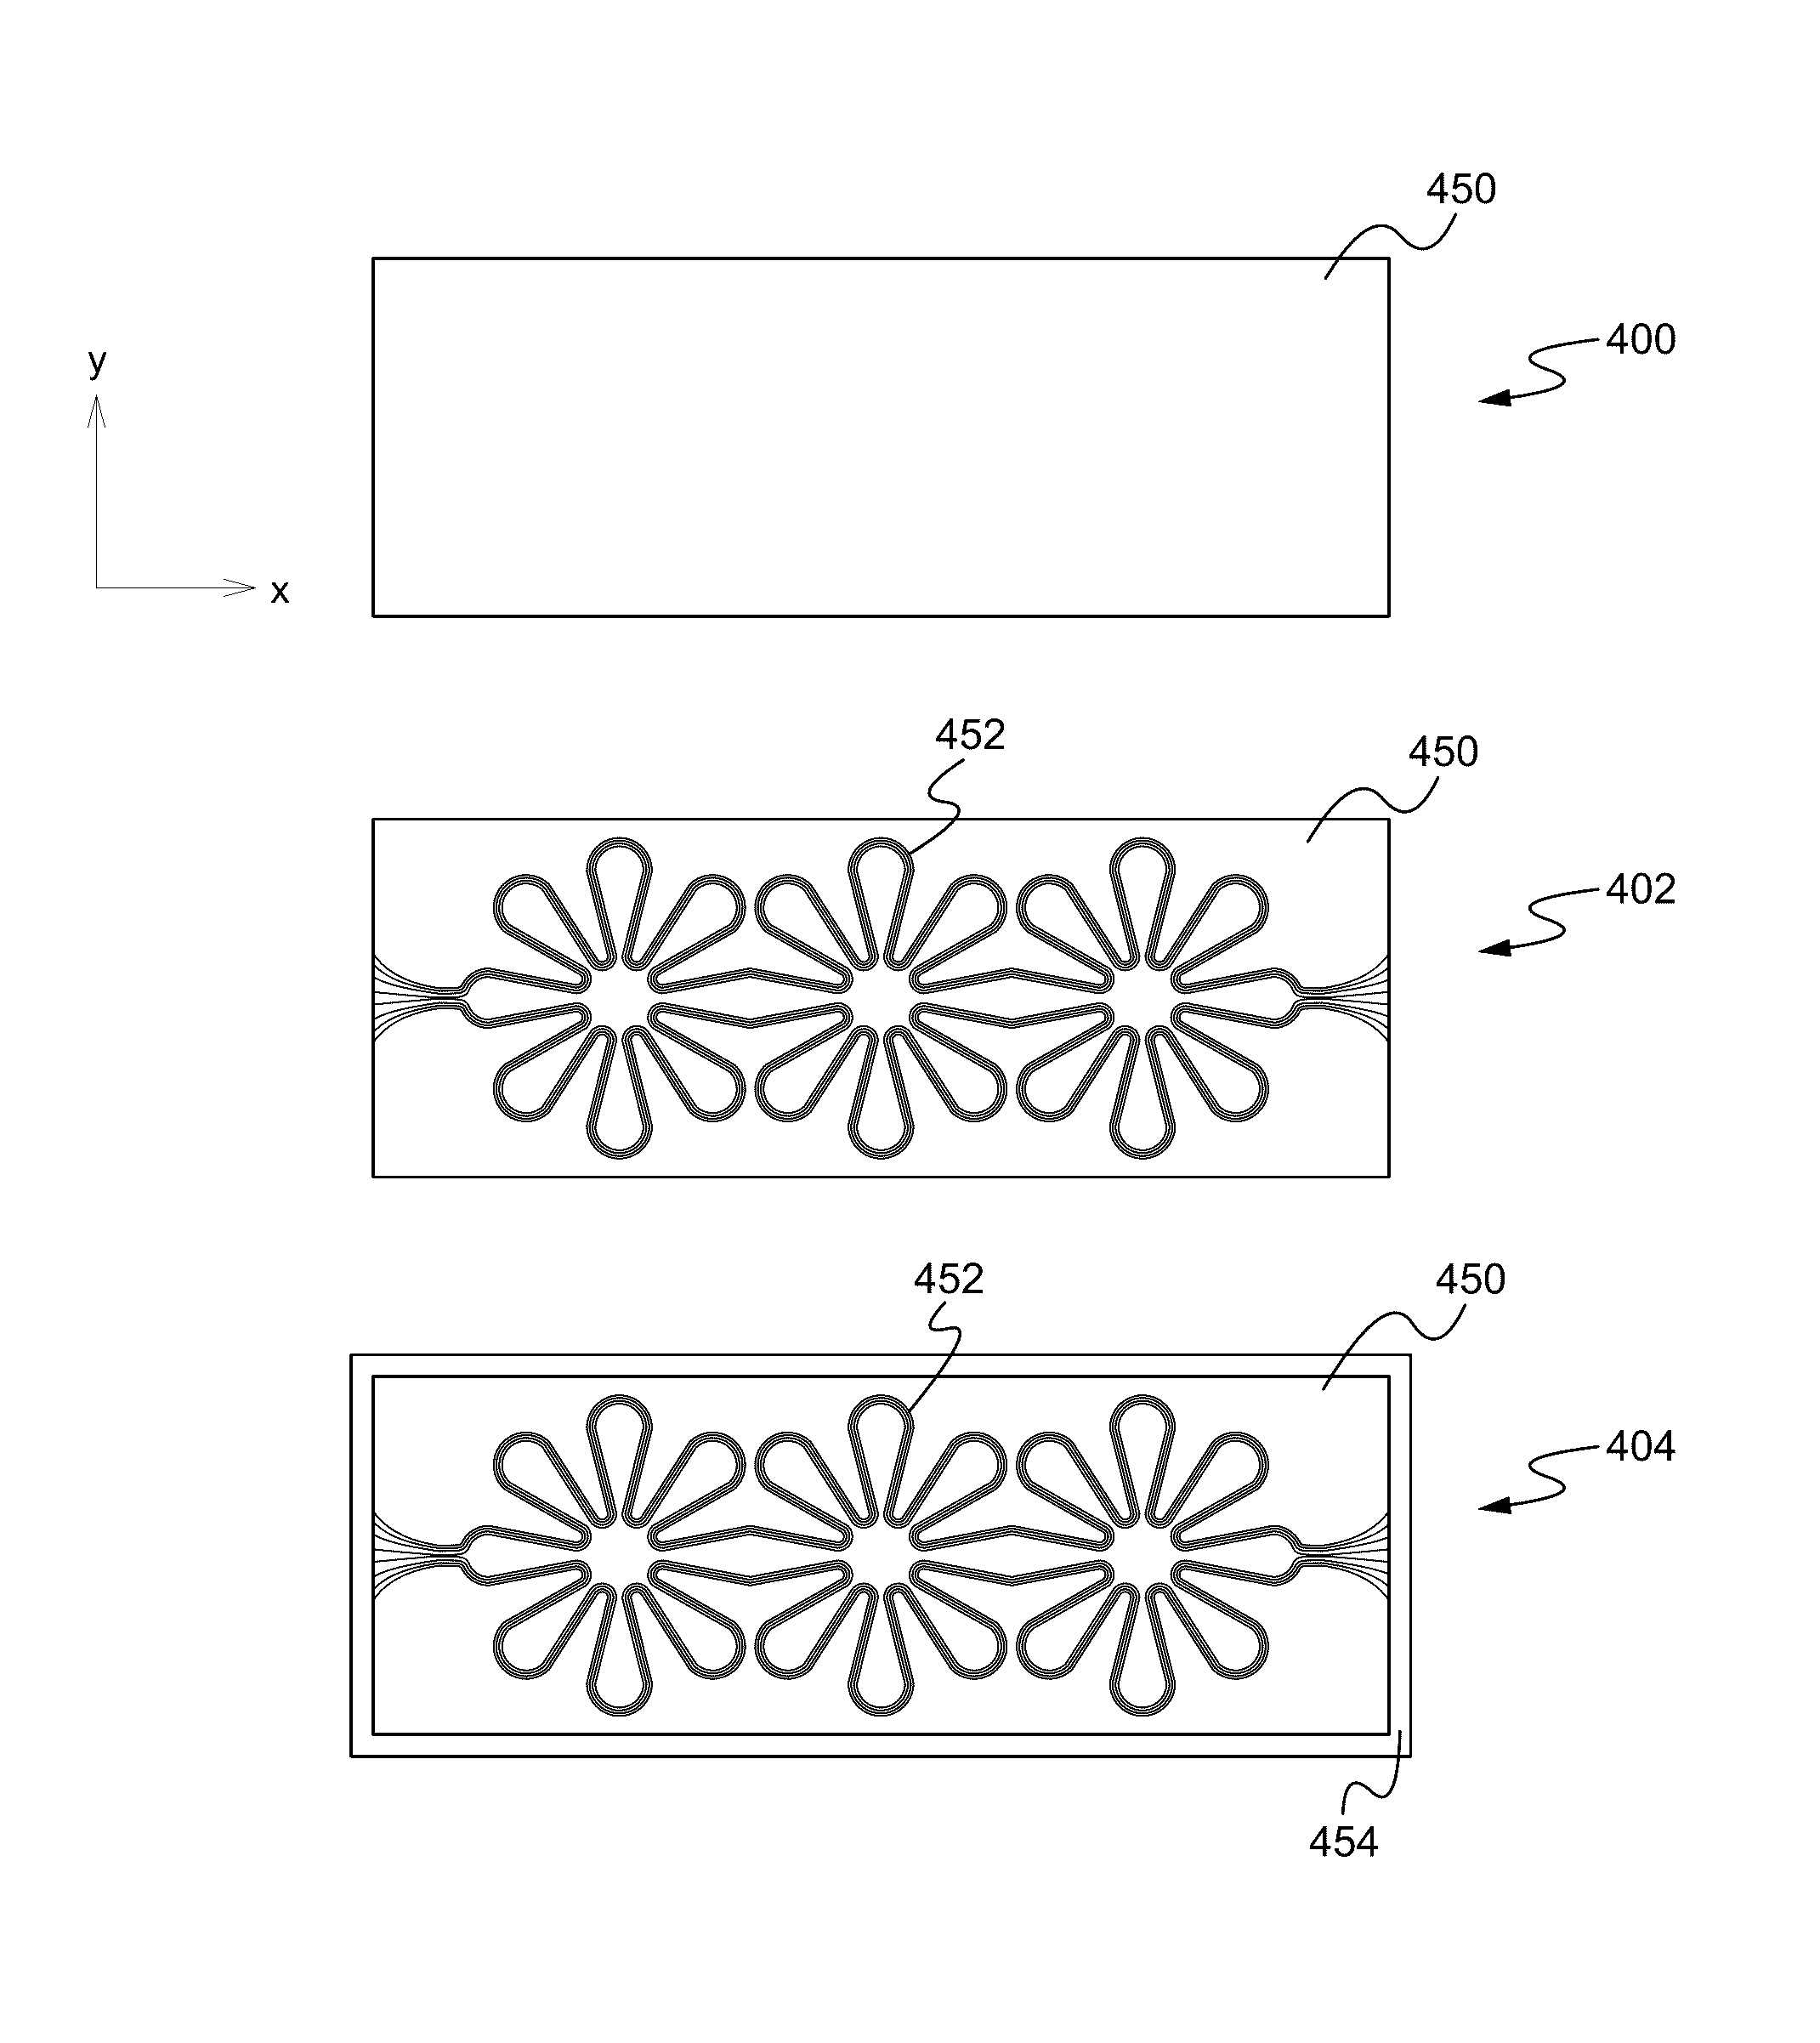 Stretchable conductor design and methods of making